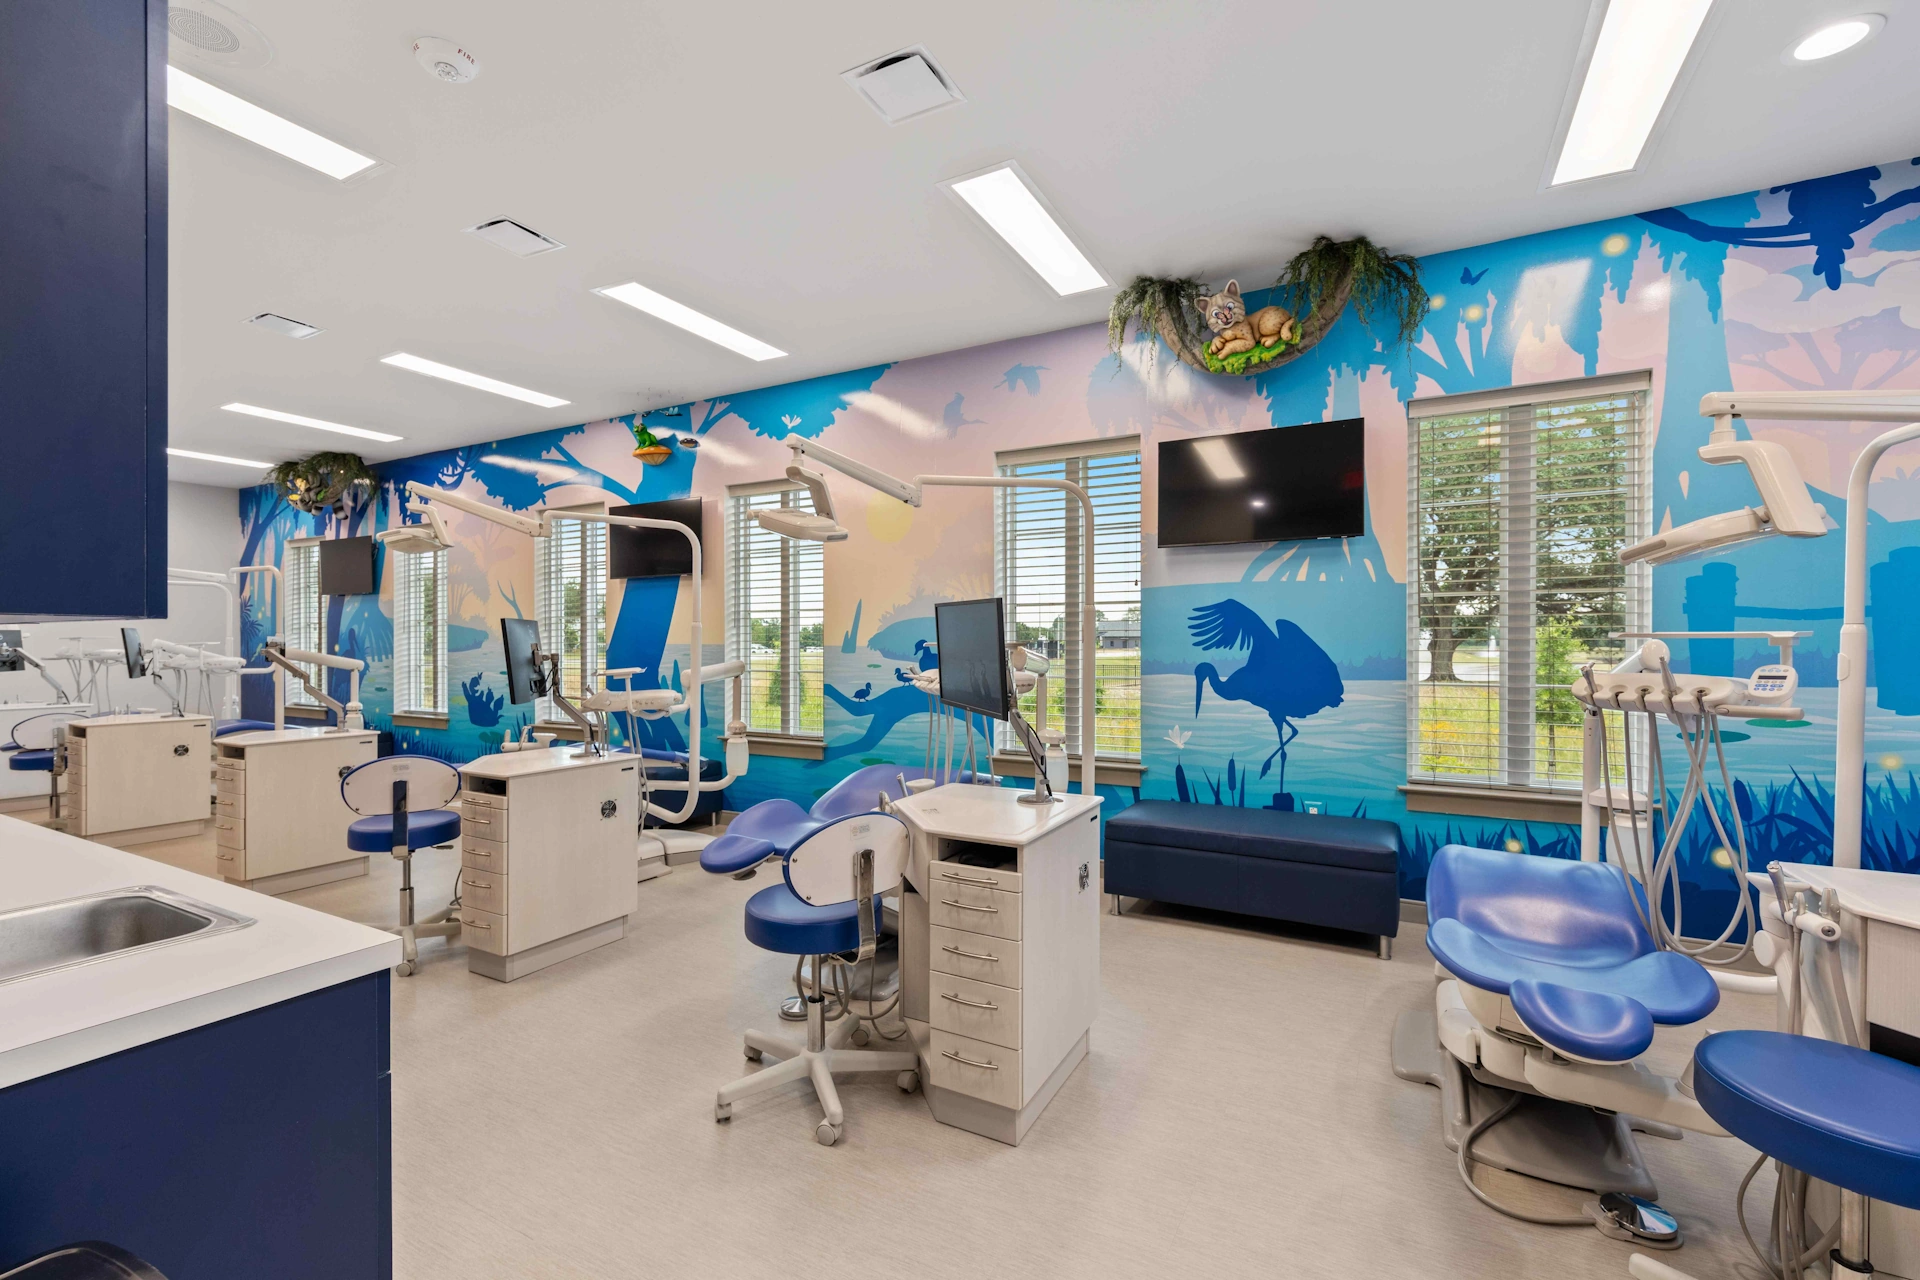 The treatment room at Lafayette Pediatric Dentistry's dental clinic